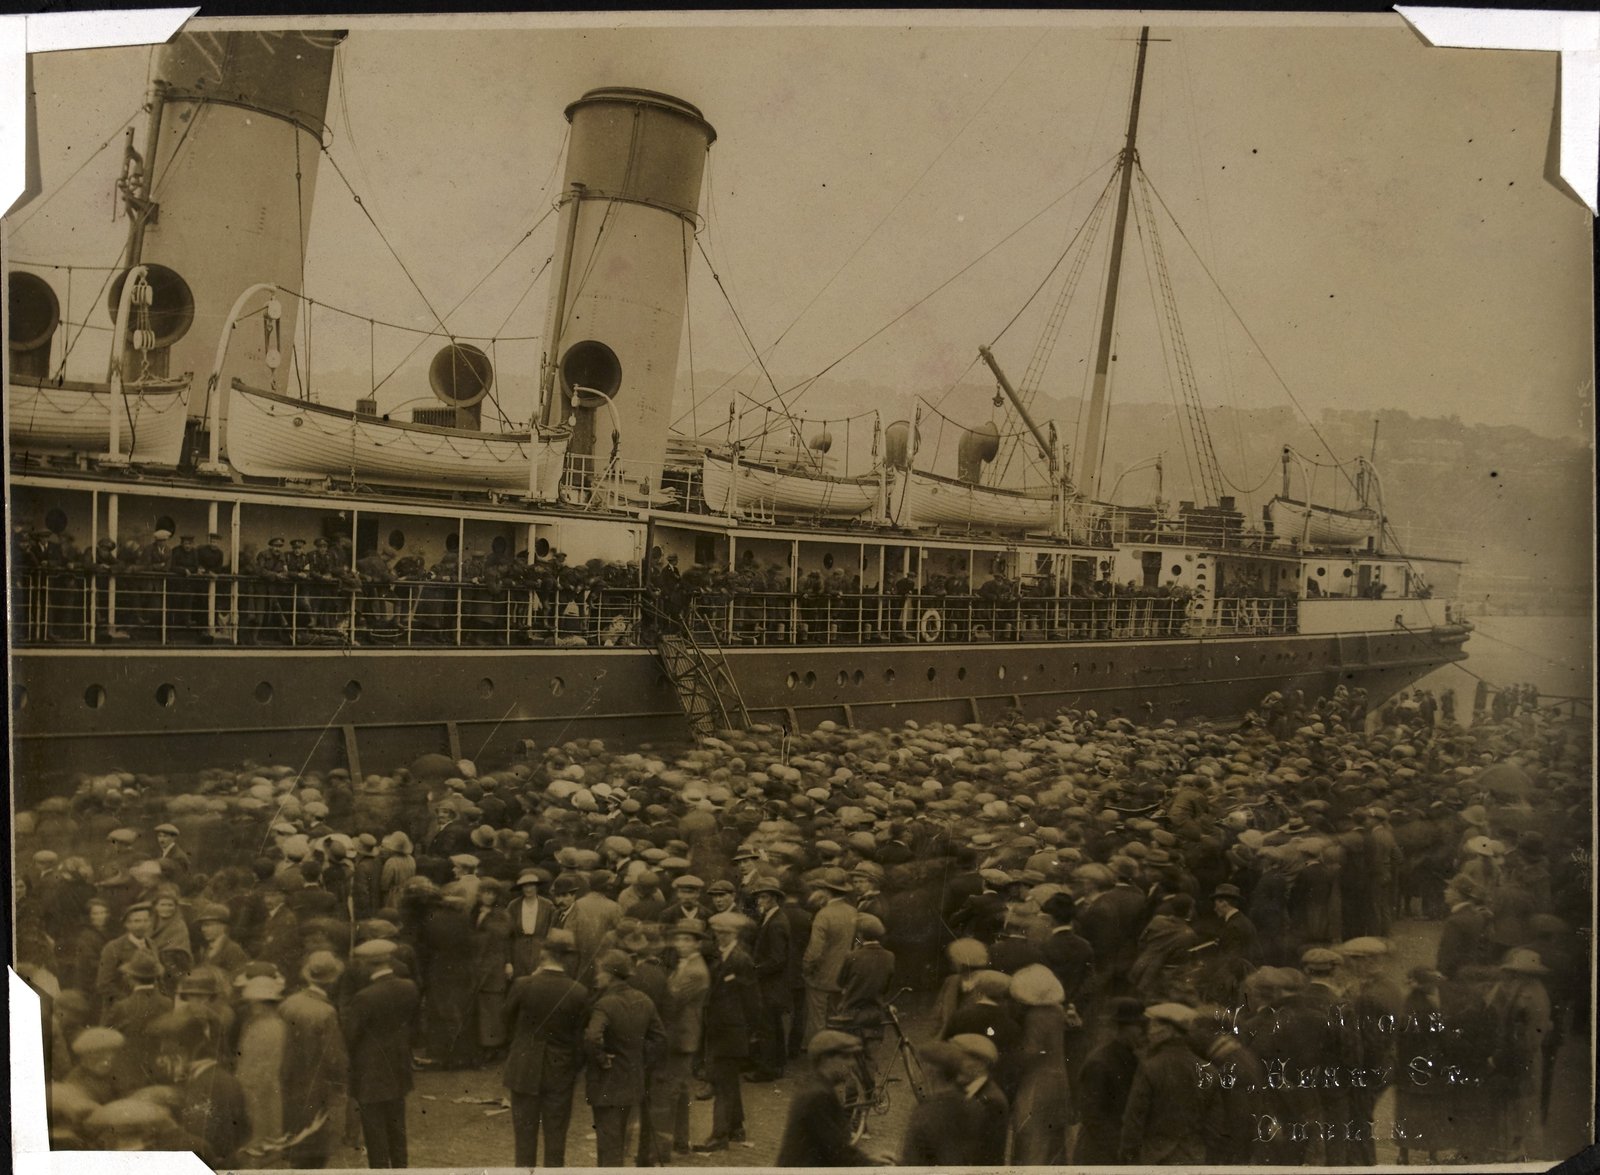 Image - The SS Lady Wicklow leaves Dublin for Cork. Image courtesy of the National Library of Ireland